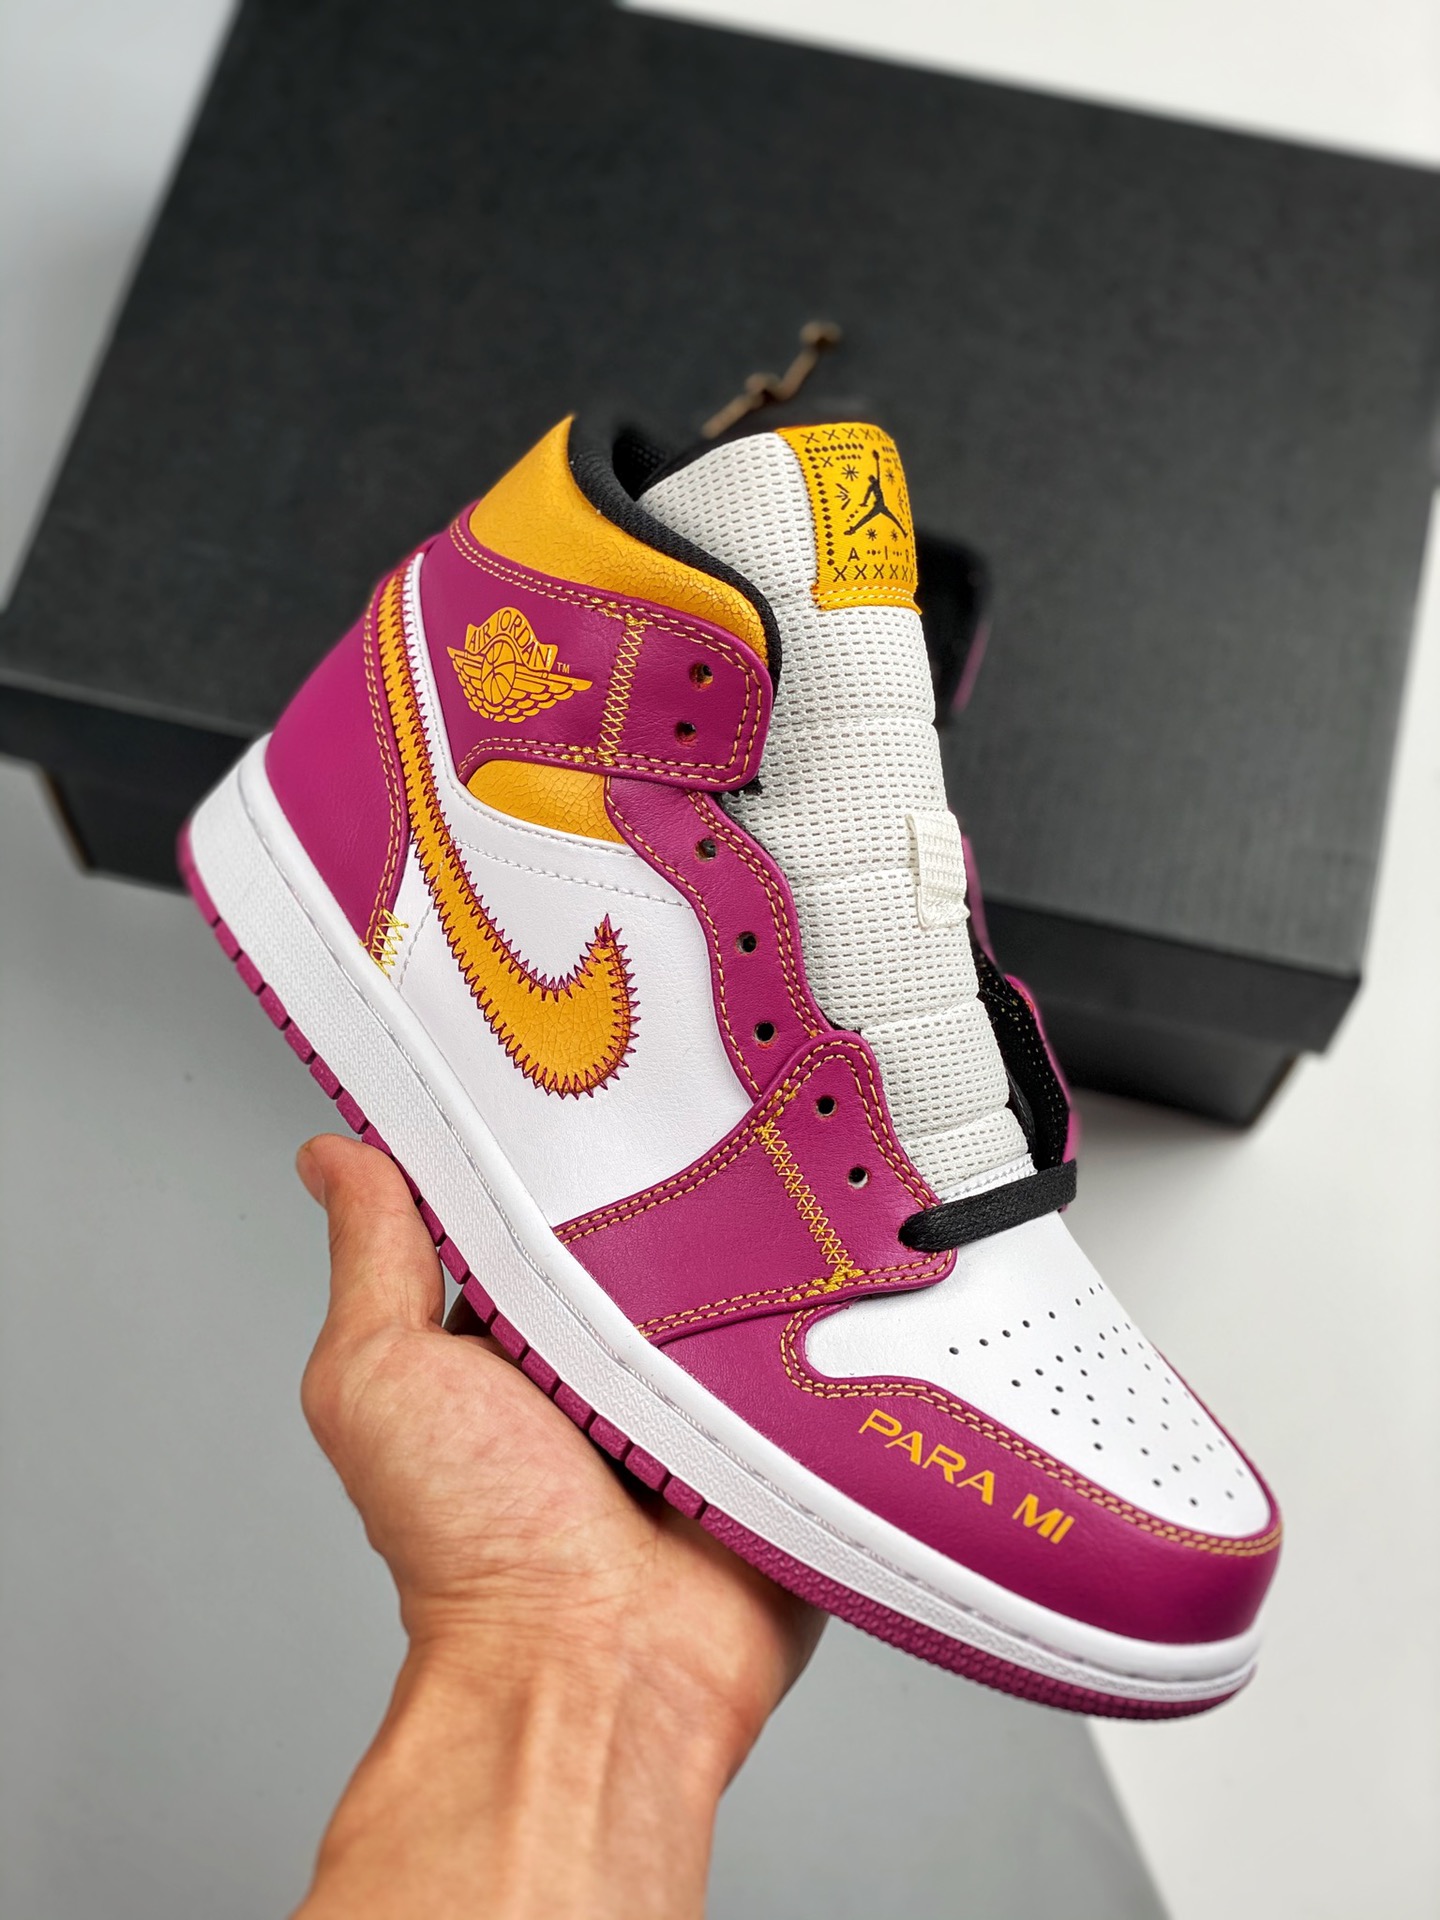 Air JD Jordan 1 Mid "Day of the Dead" DC0350-100 Shoes